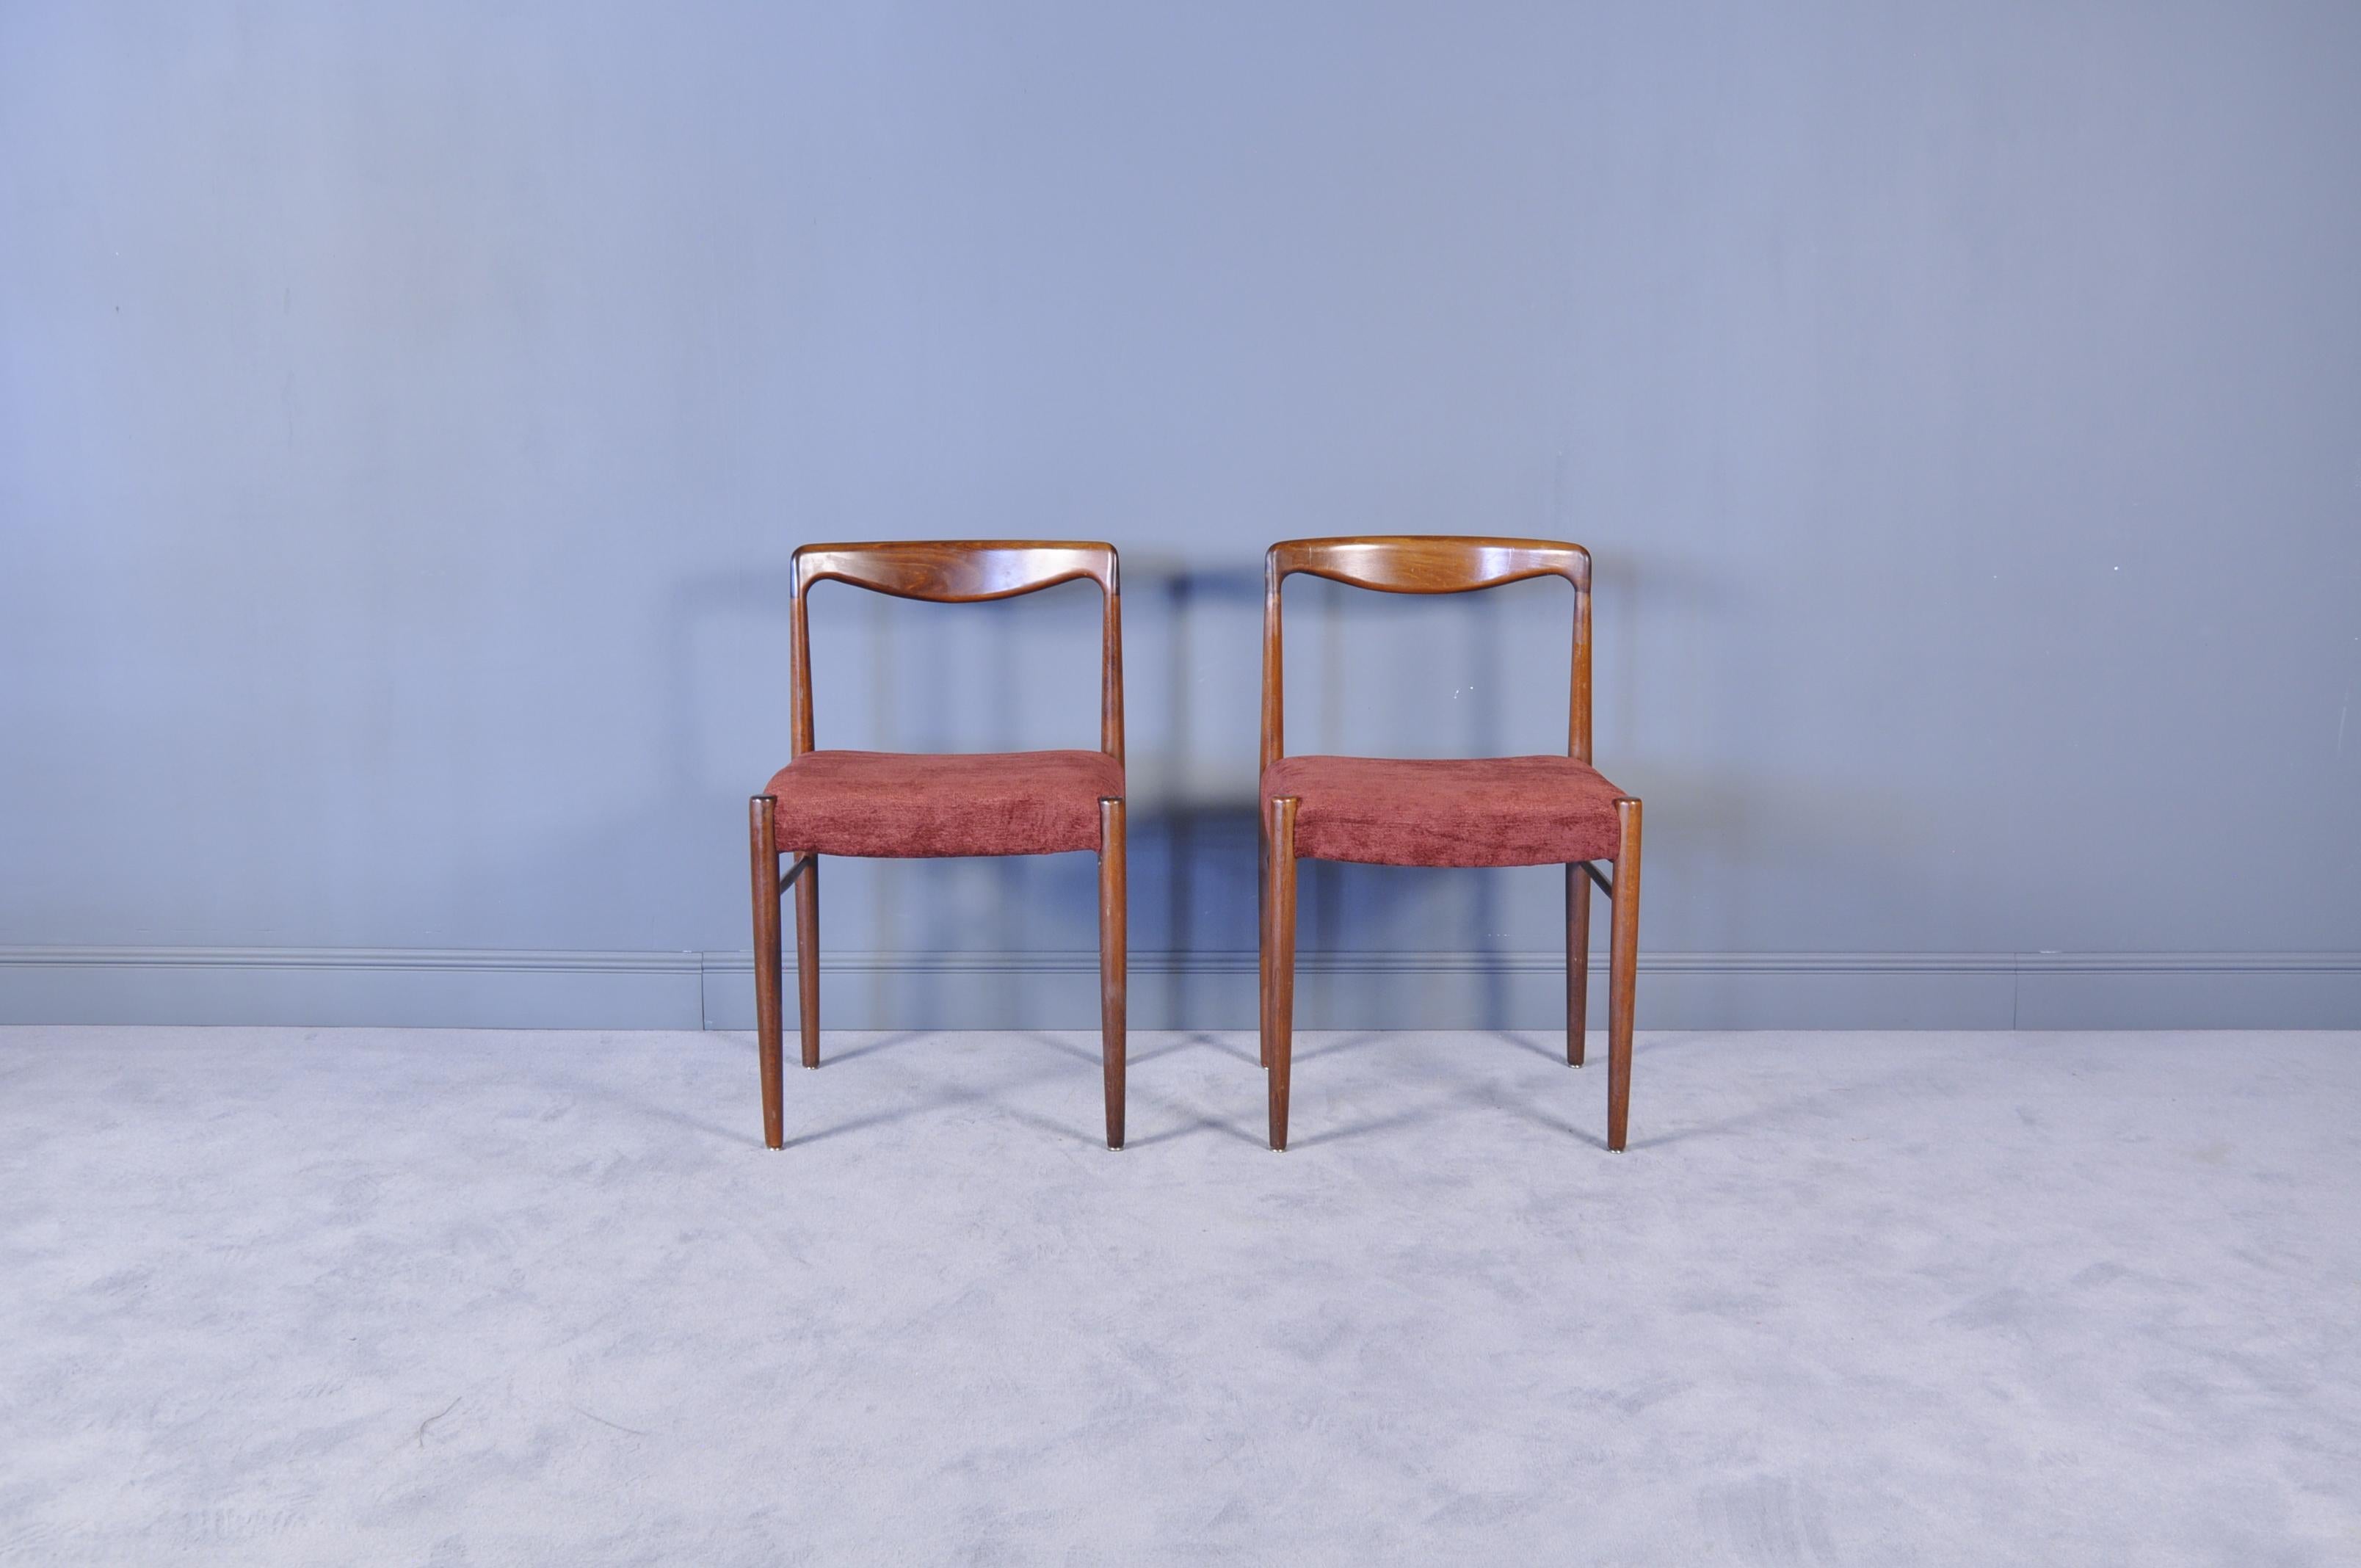 This set of eight dining chairs were manufactured in the 1960s in Germany by Lübke. The chairs are made of solid rosewood in a minimalist design.